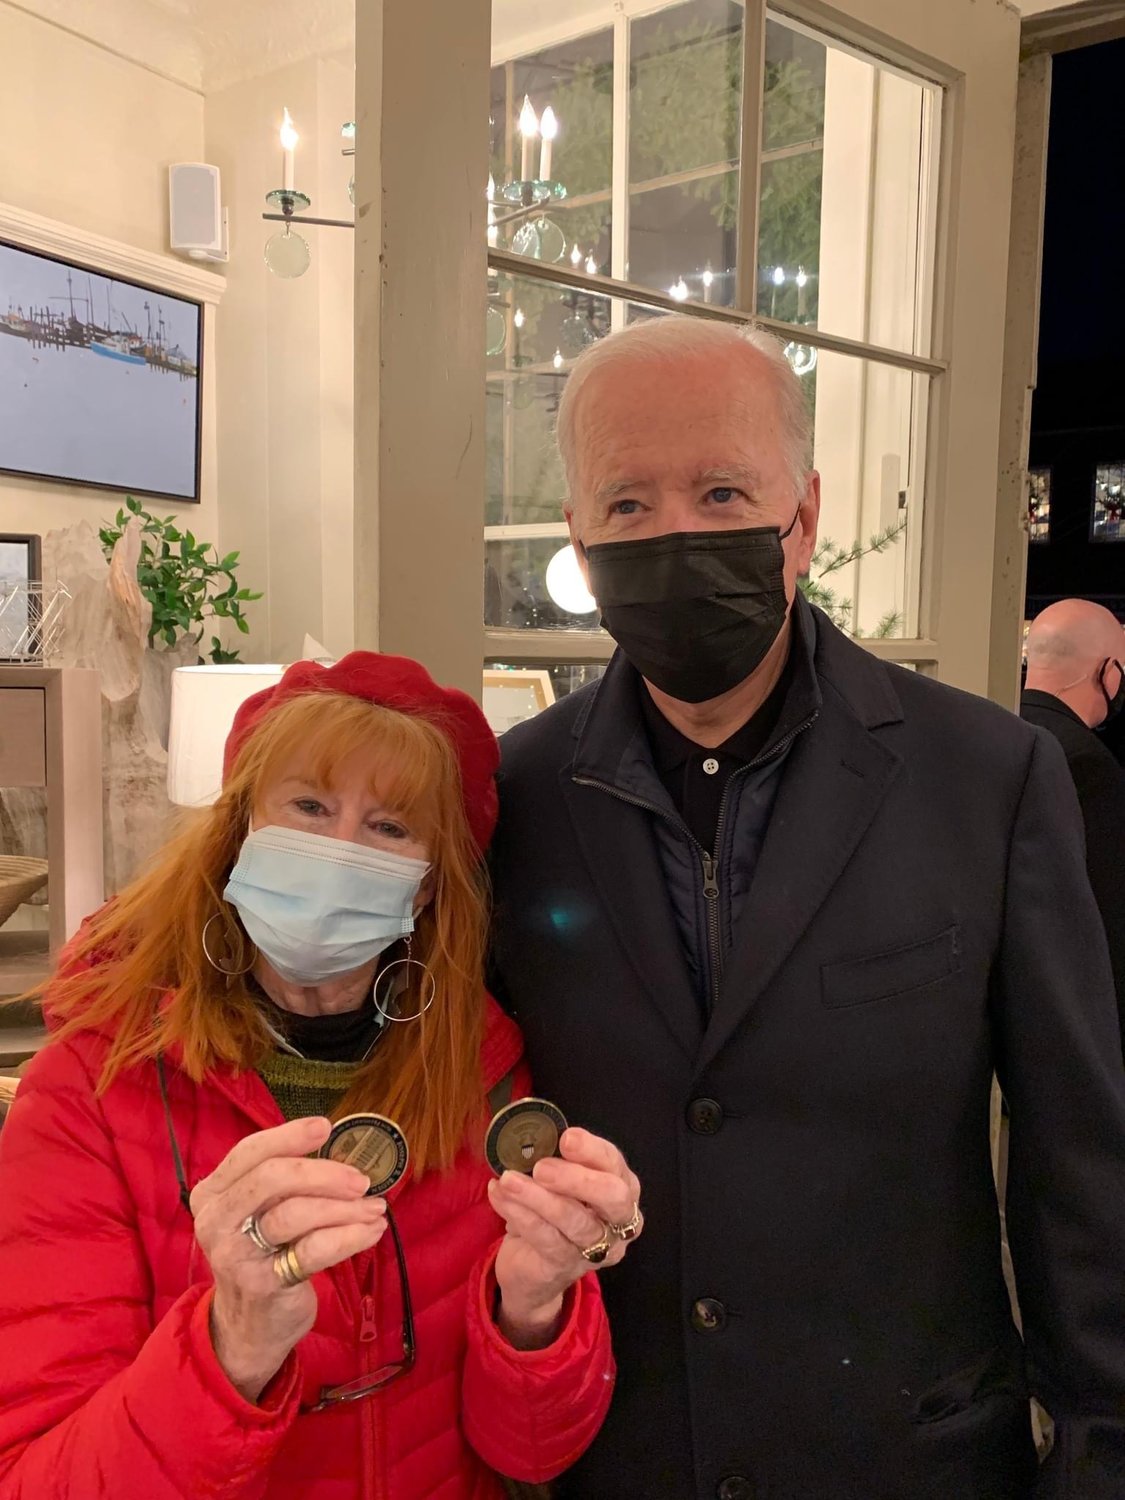 Susan Cary of Nantucket with President Biden and the two challenge coins he has given her, one during a previous visit, and one when she saw him at Nantucket Looms Saturday.